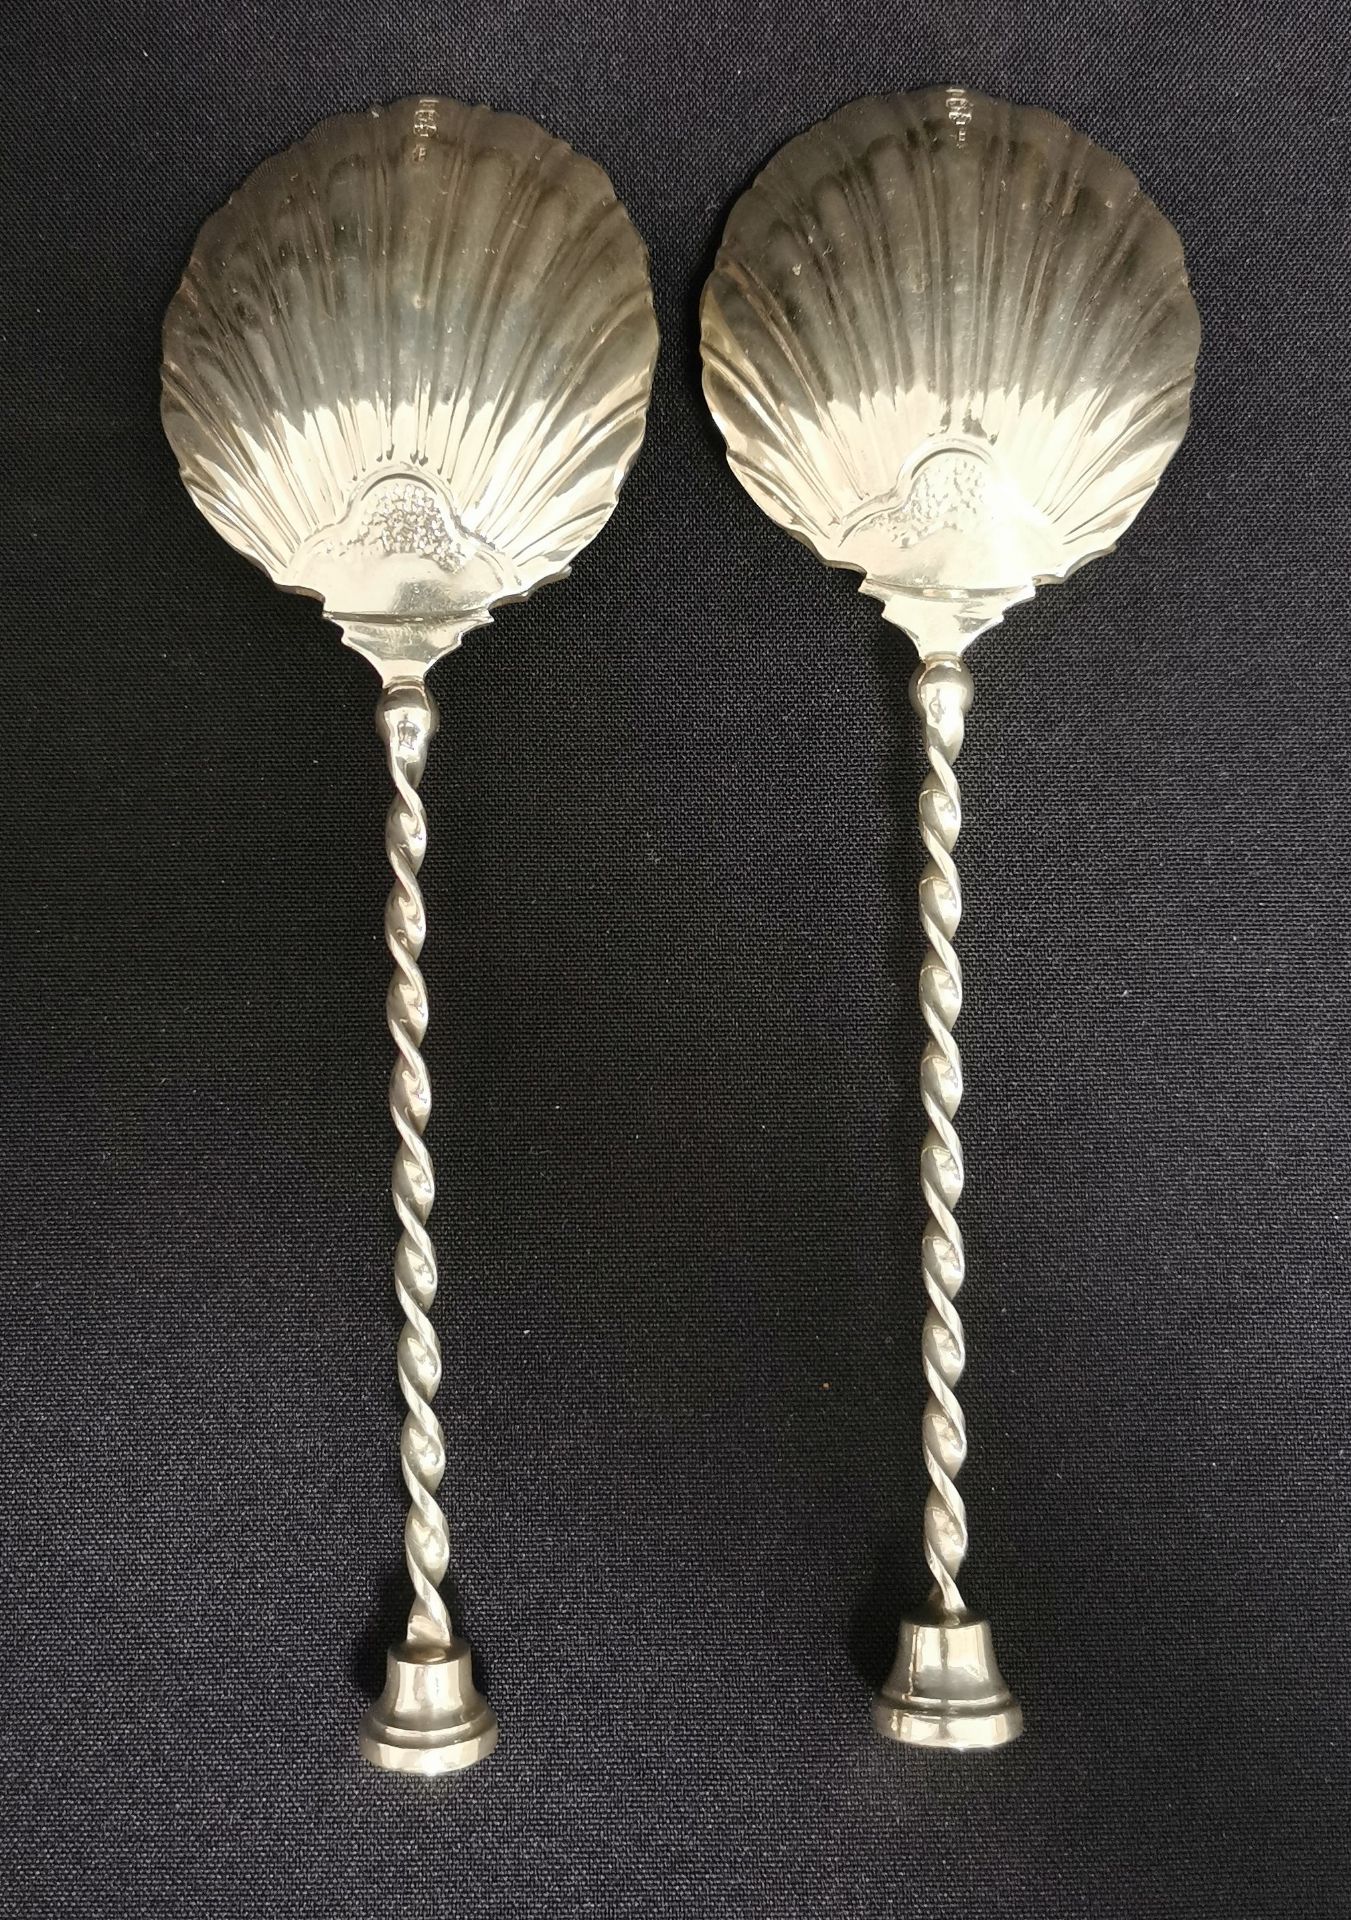 2 ENGLISH SERVING SPOONS - Image 2 of 3